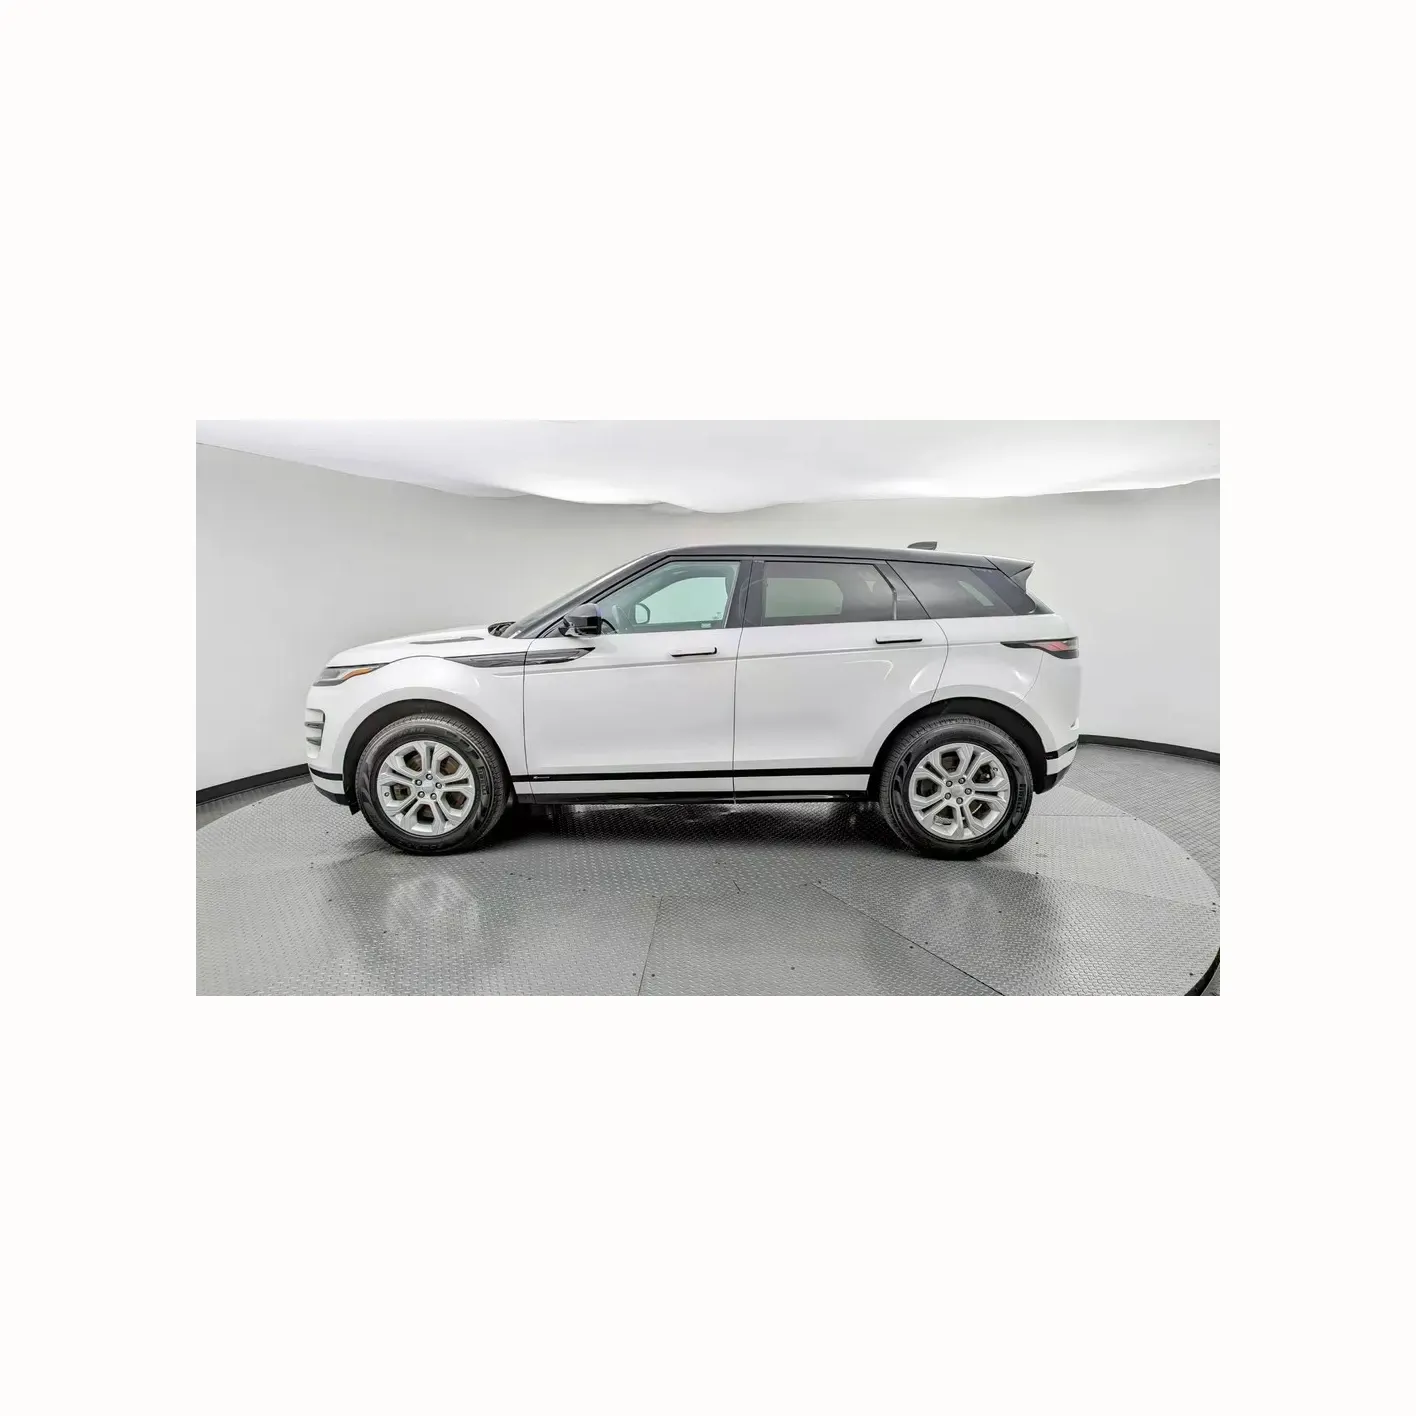 Second Hand Car for Sale All Model With Good Pricing 2020 L-A-N-D R-O-V-E-R RANGE ROVER EVOQUE